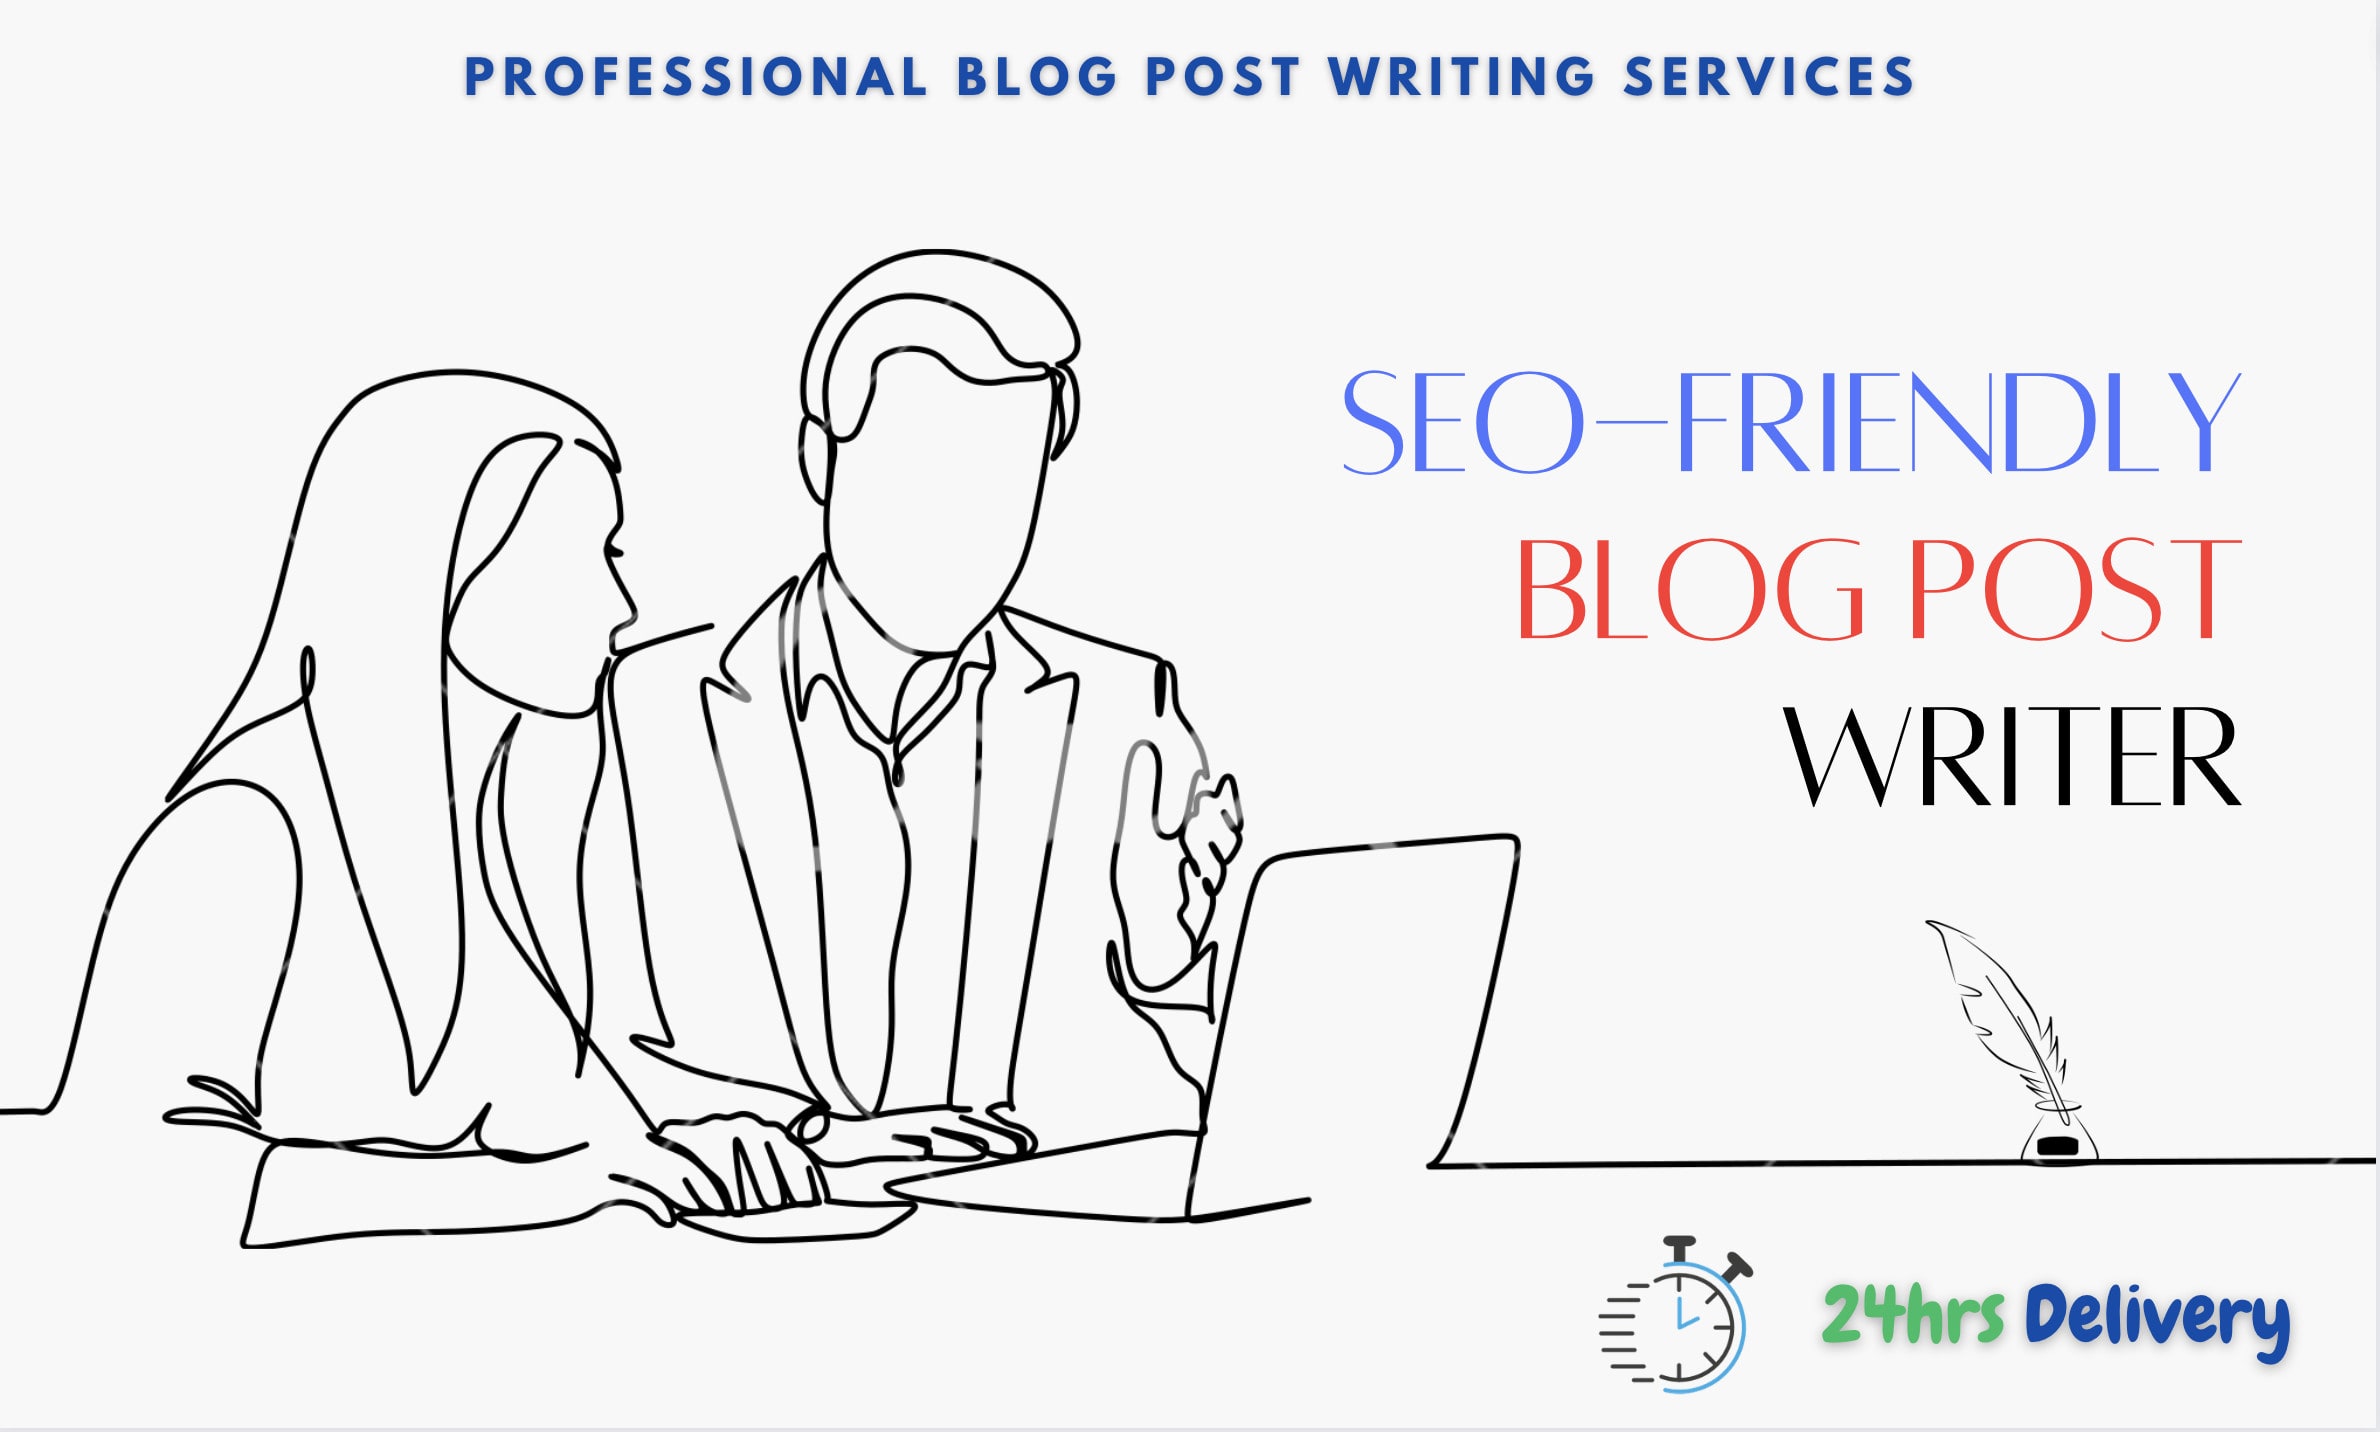 I will write custom and engaging SEO friendly article (up to 500 words) for your blog